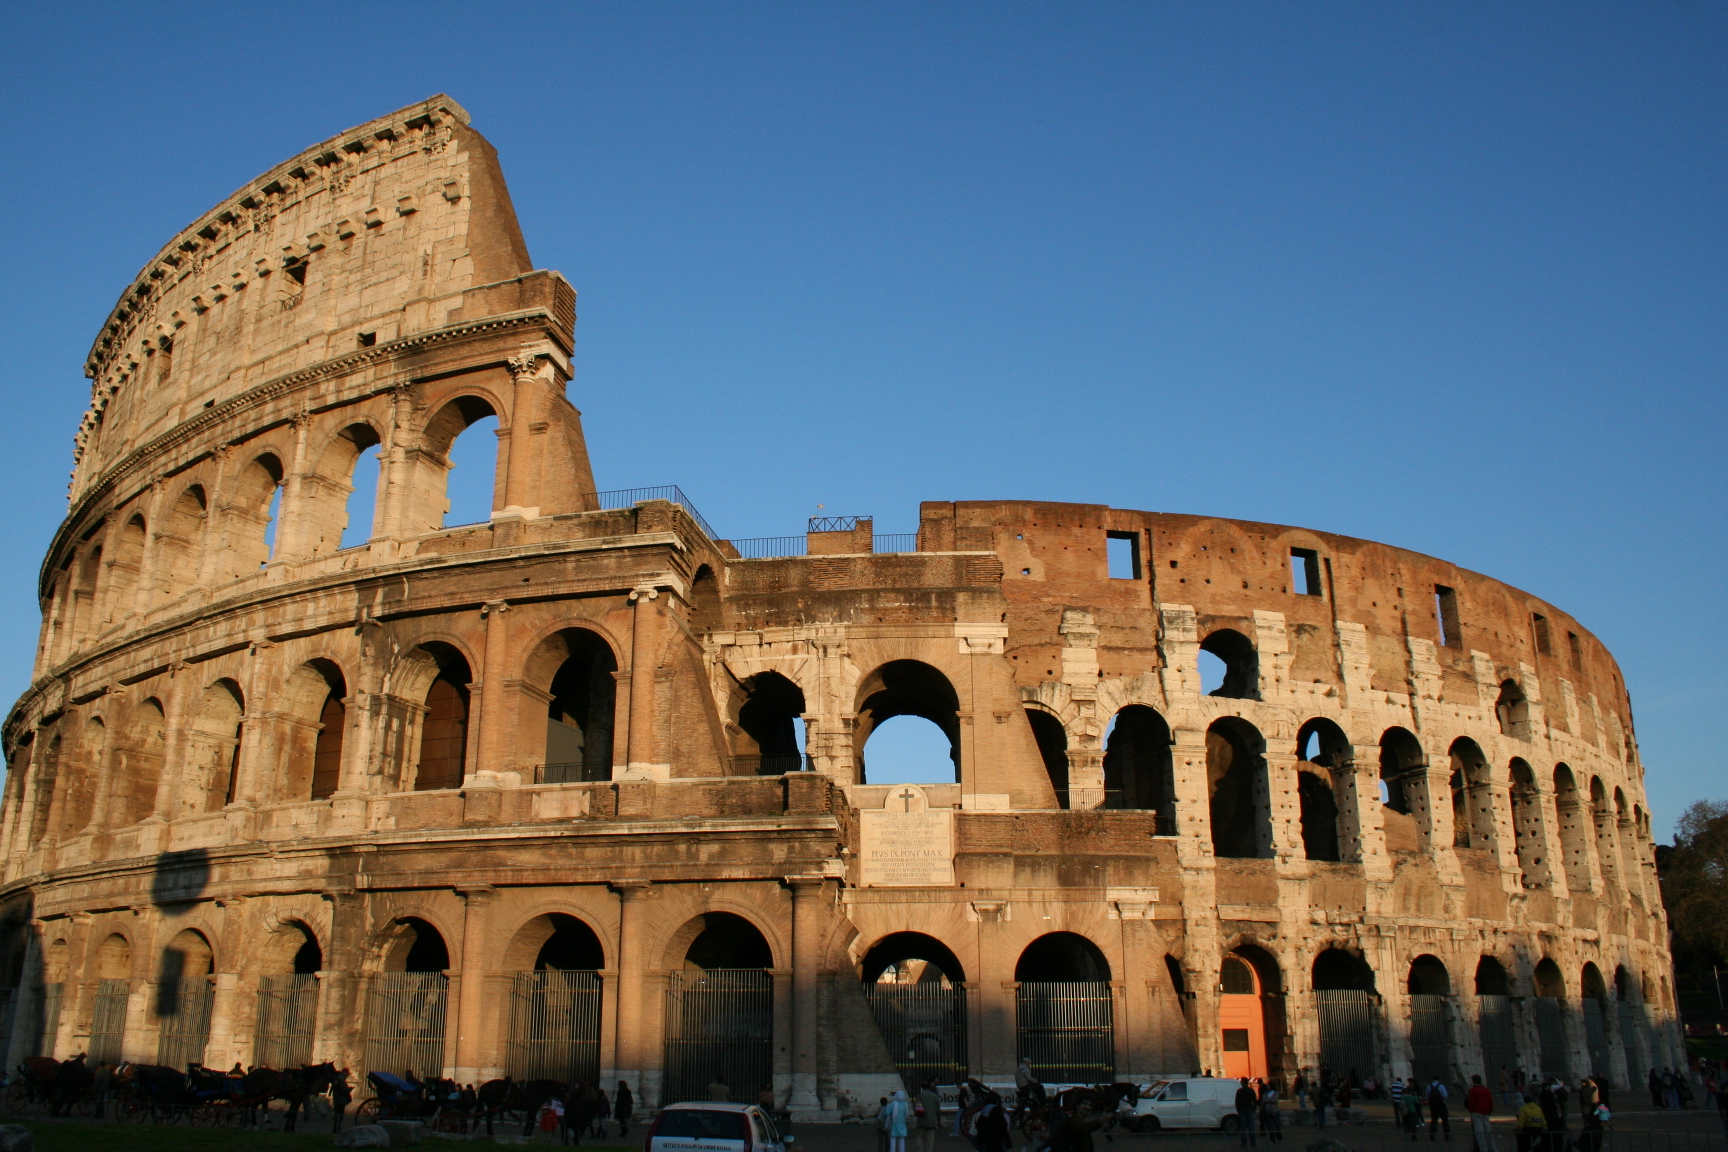 Approximately how many Amphitheatres are the Romans said to have built?